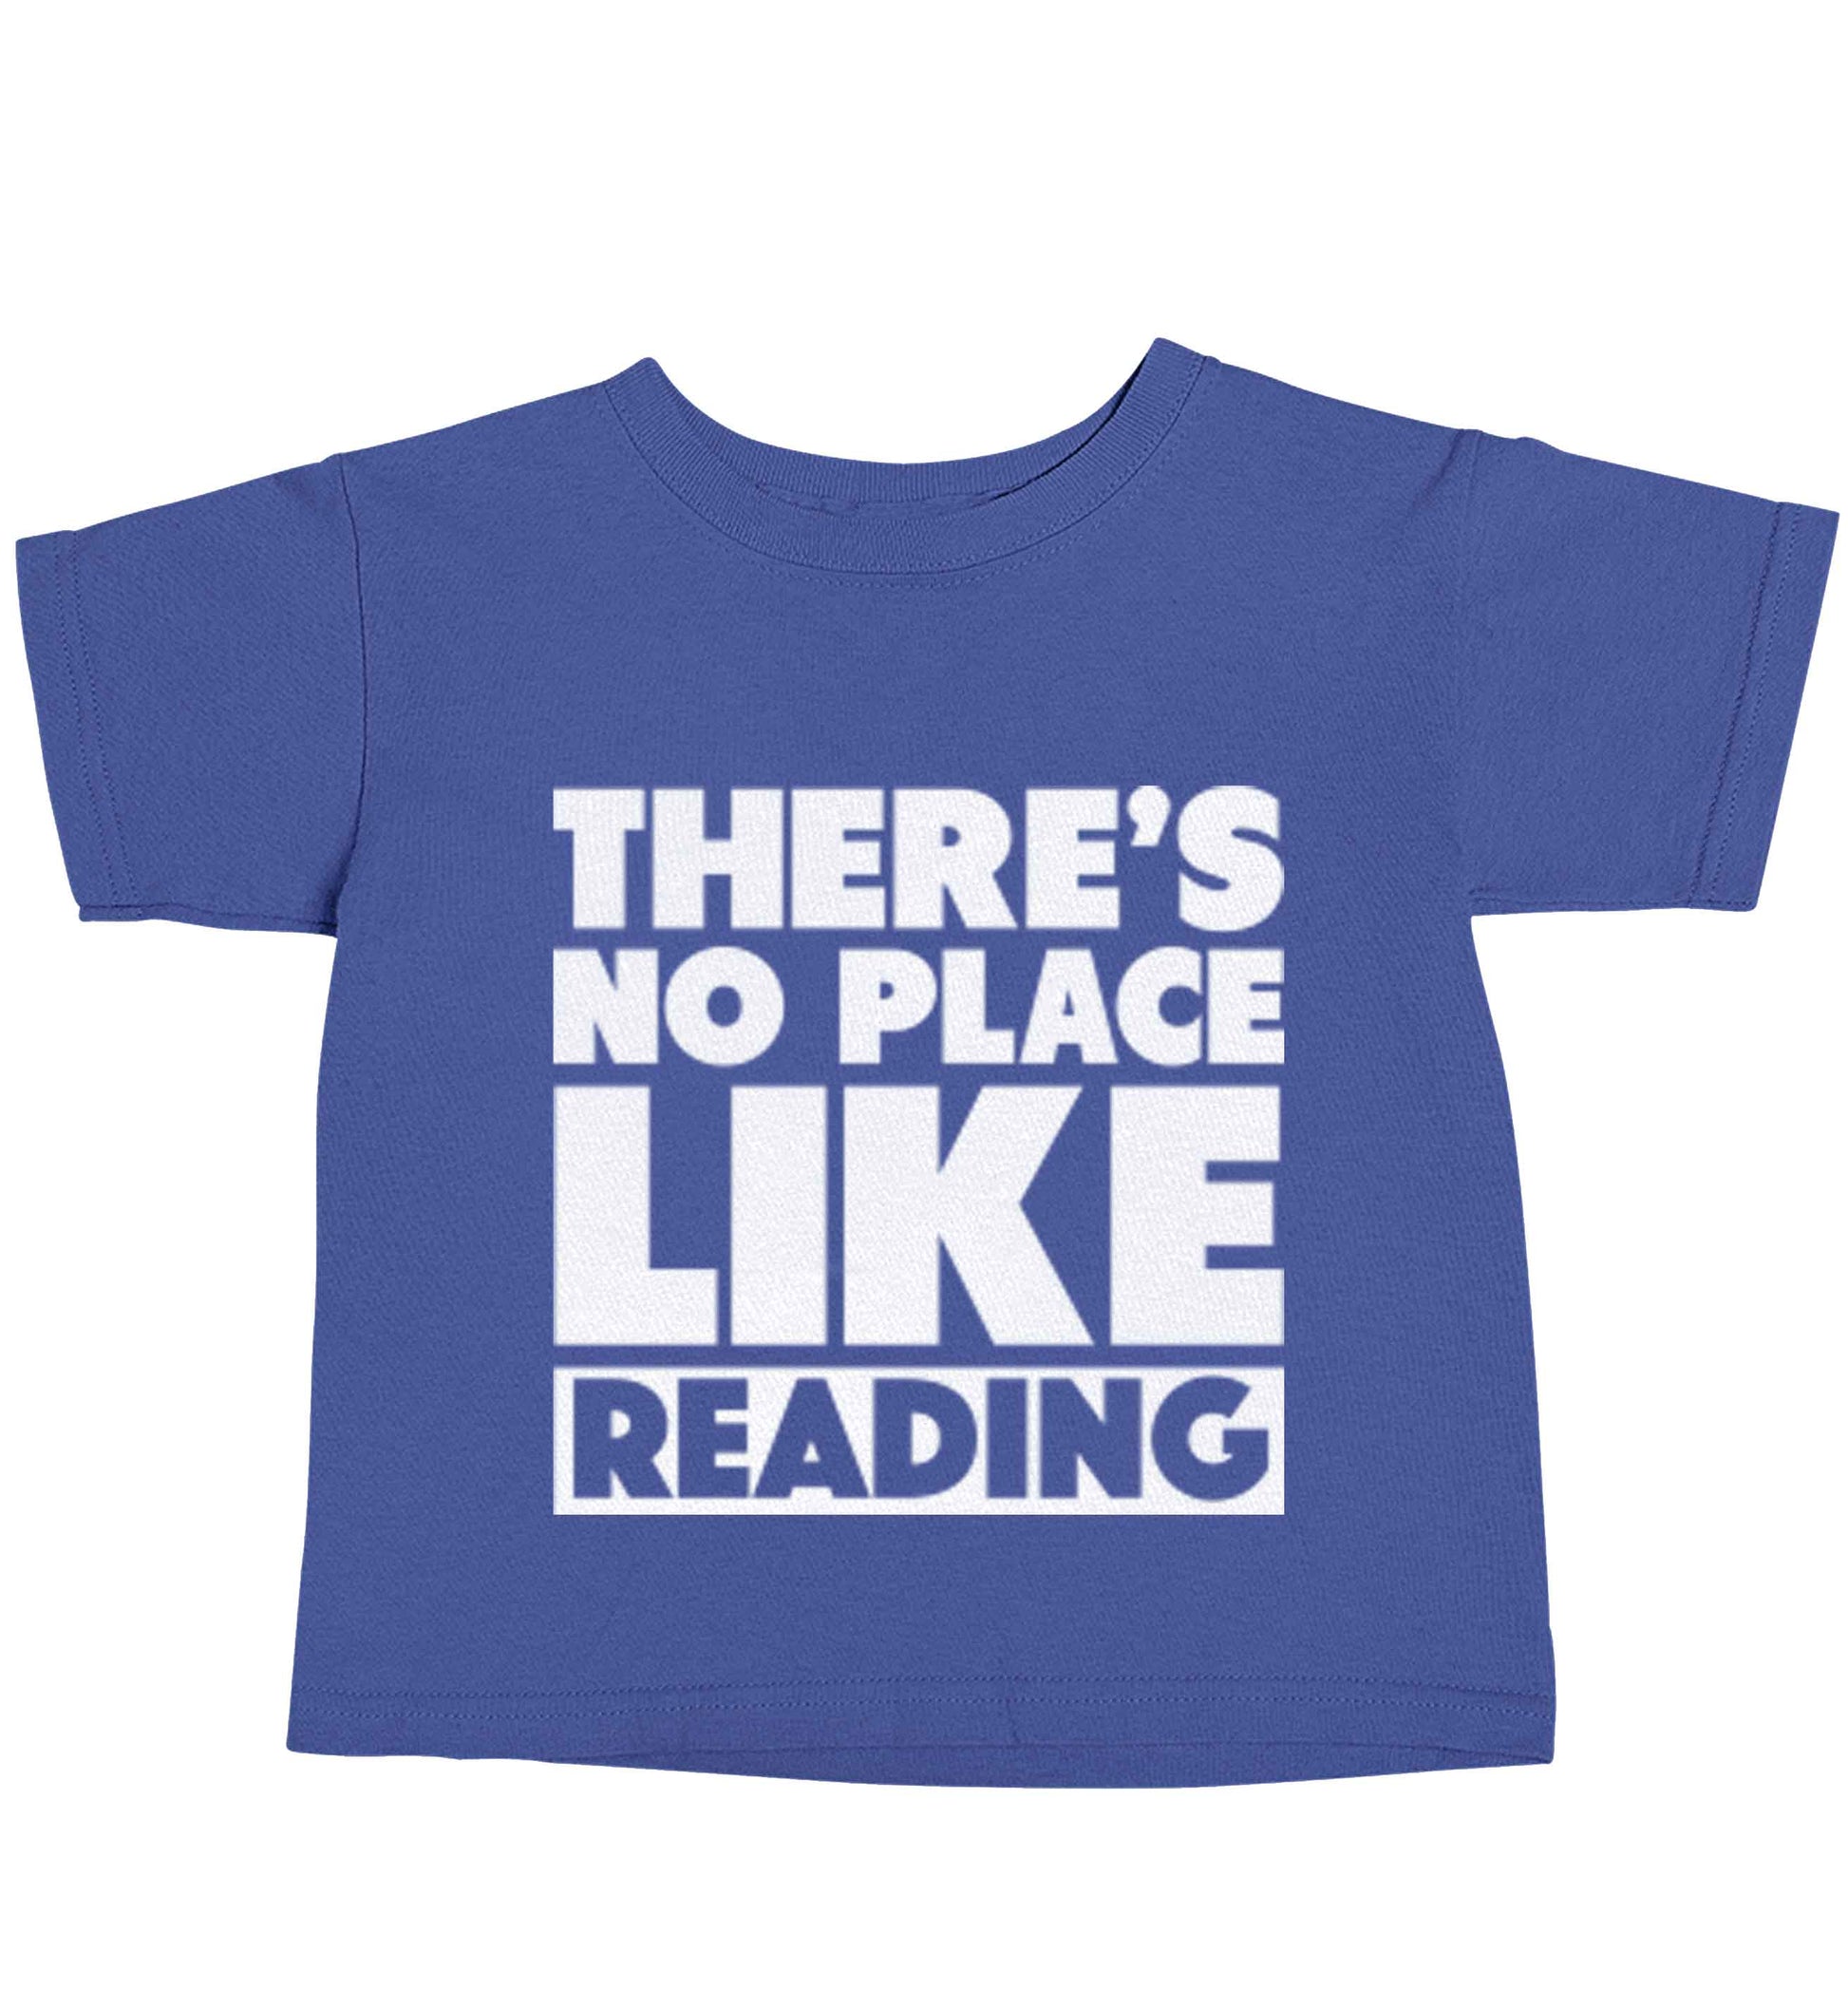 There's no place like Readingblue baby toddler Tshirt 2 Years